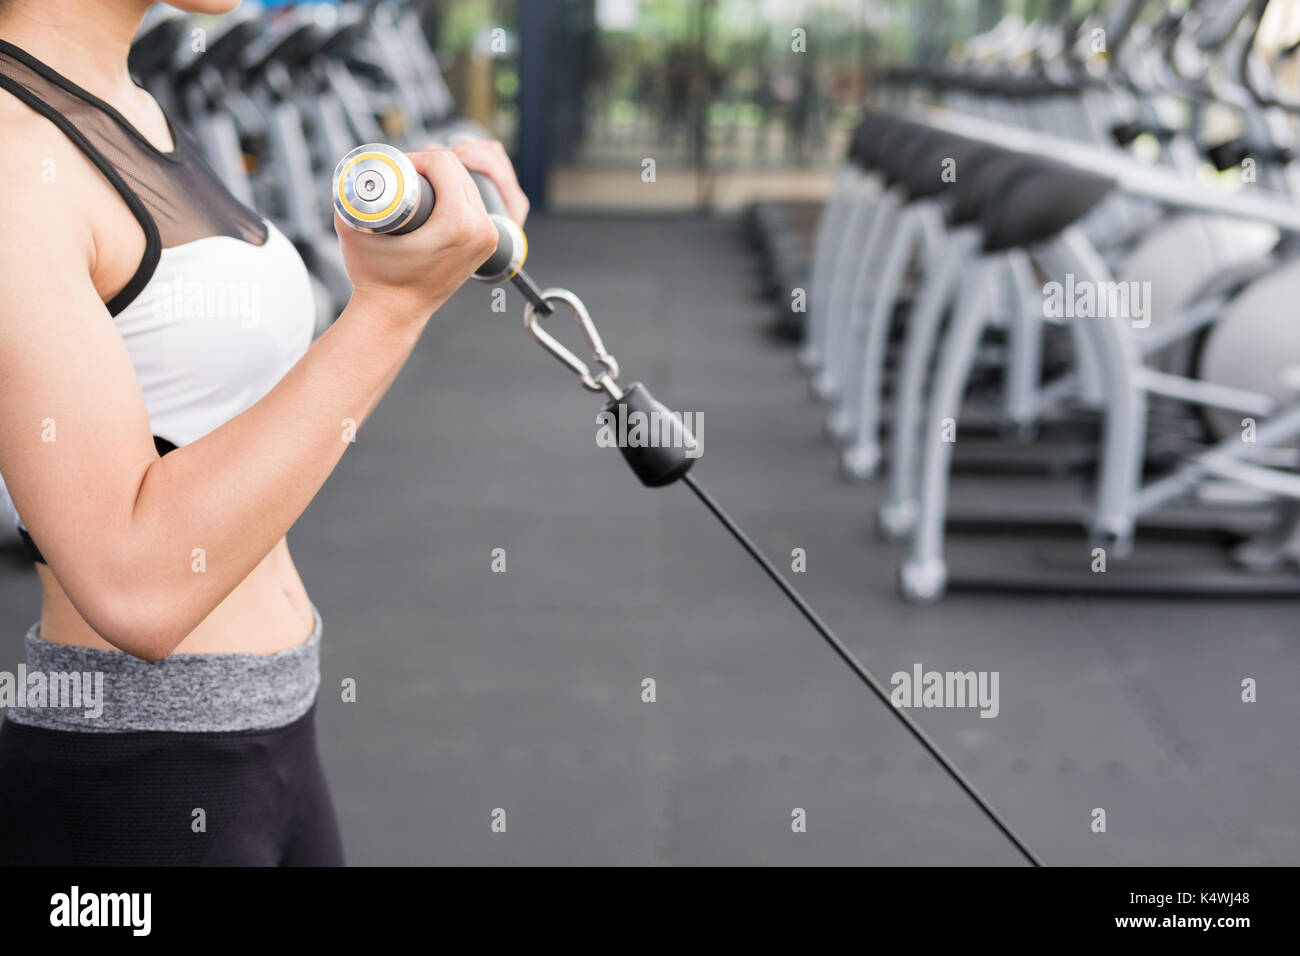 Beautiful women working out in gym Stock Photo - Alamy